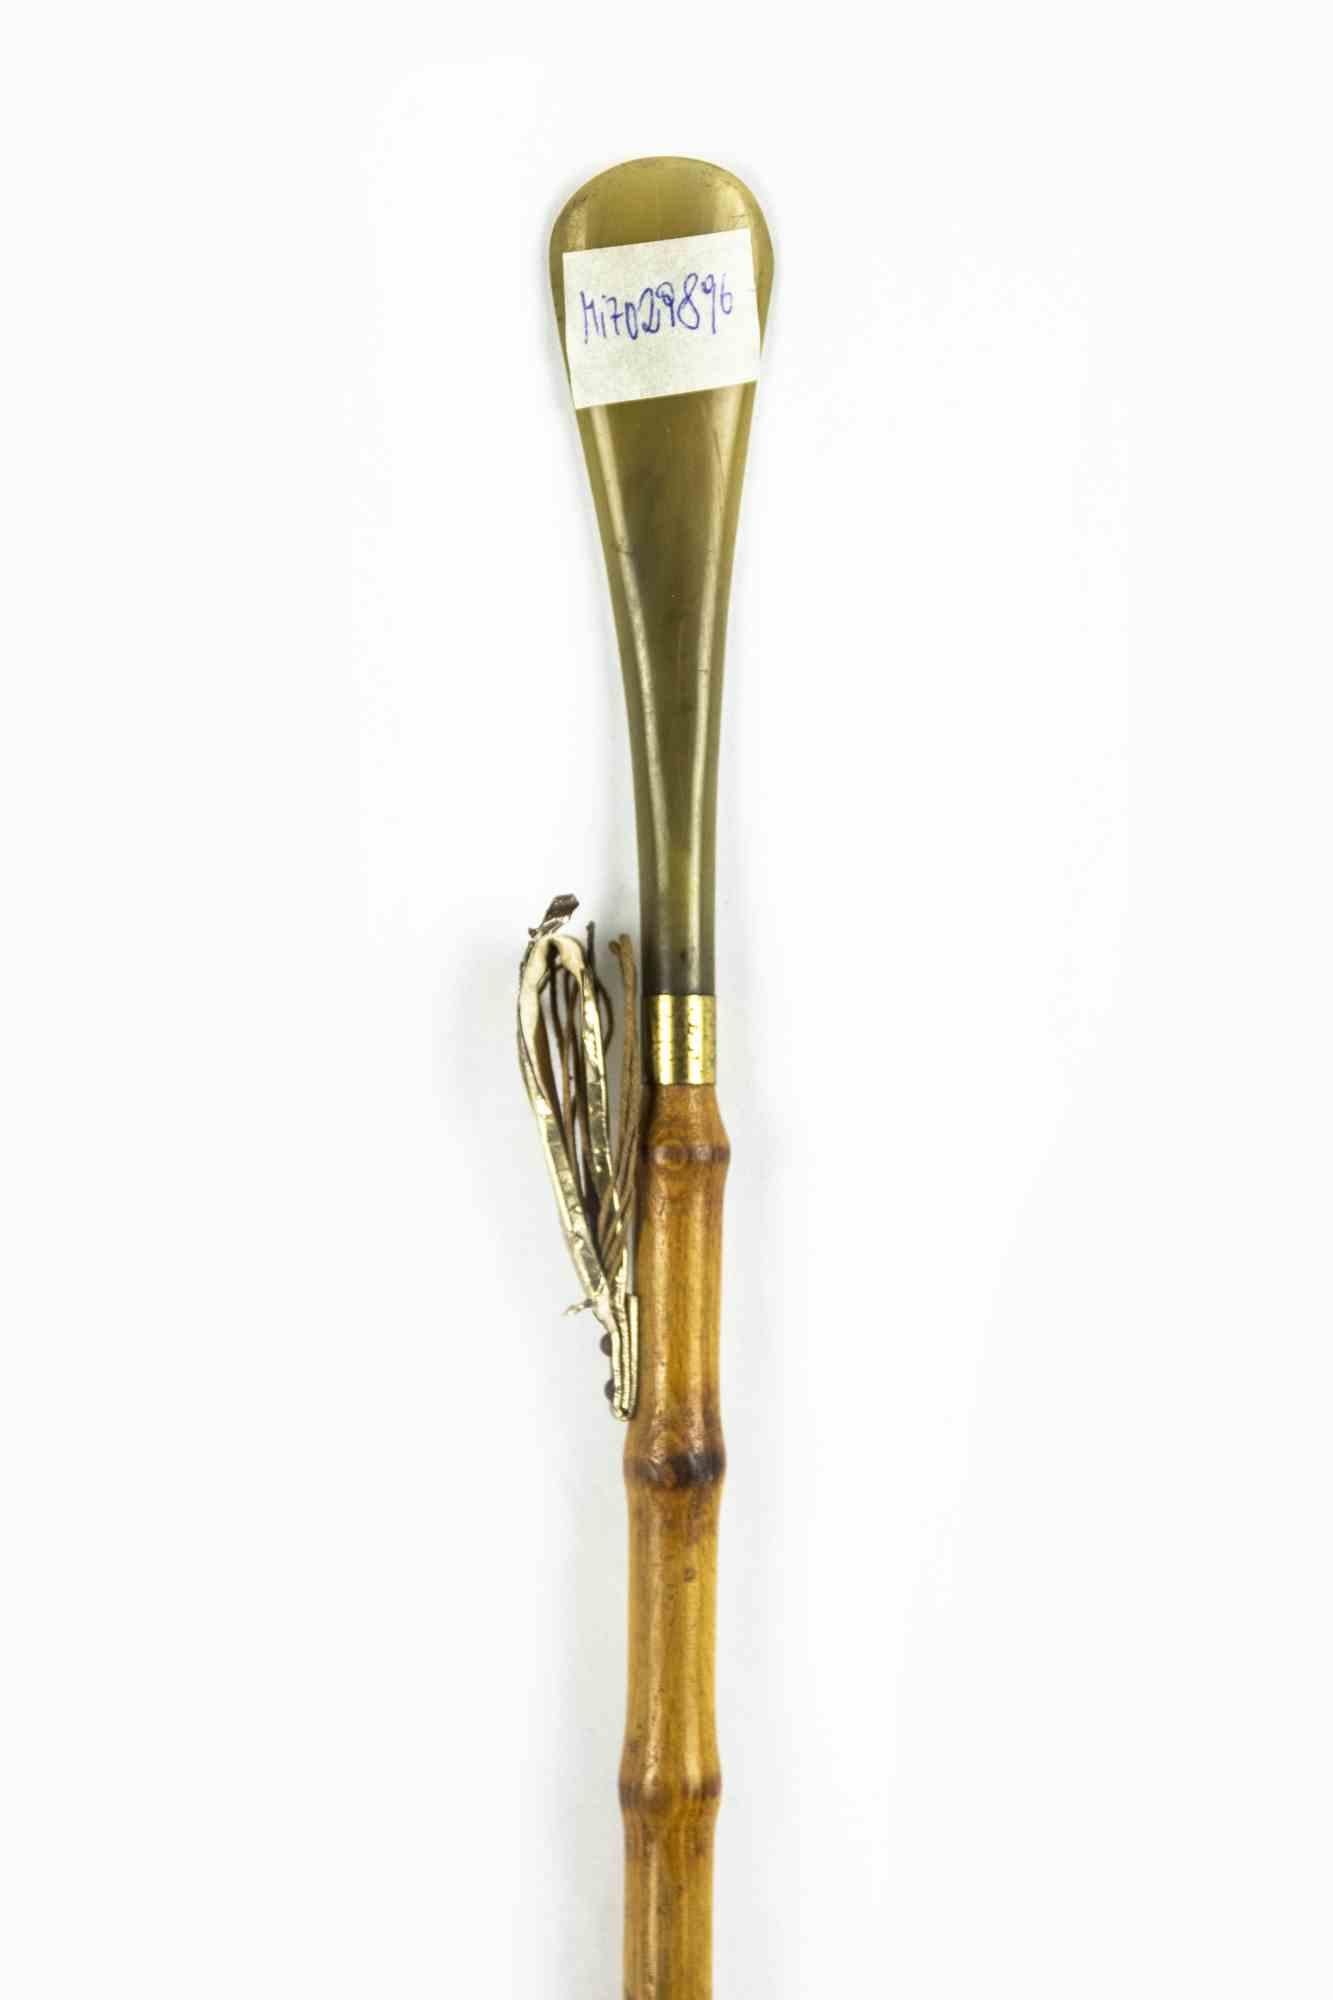 Vintage Shoehorn vase is a original decorative object realized in the mid-20th century.

Made in Italy. 

The object is realized with bamboo wood and steel decorations. The knob presents several chiseled decorations. 

Very good conditions.